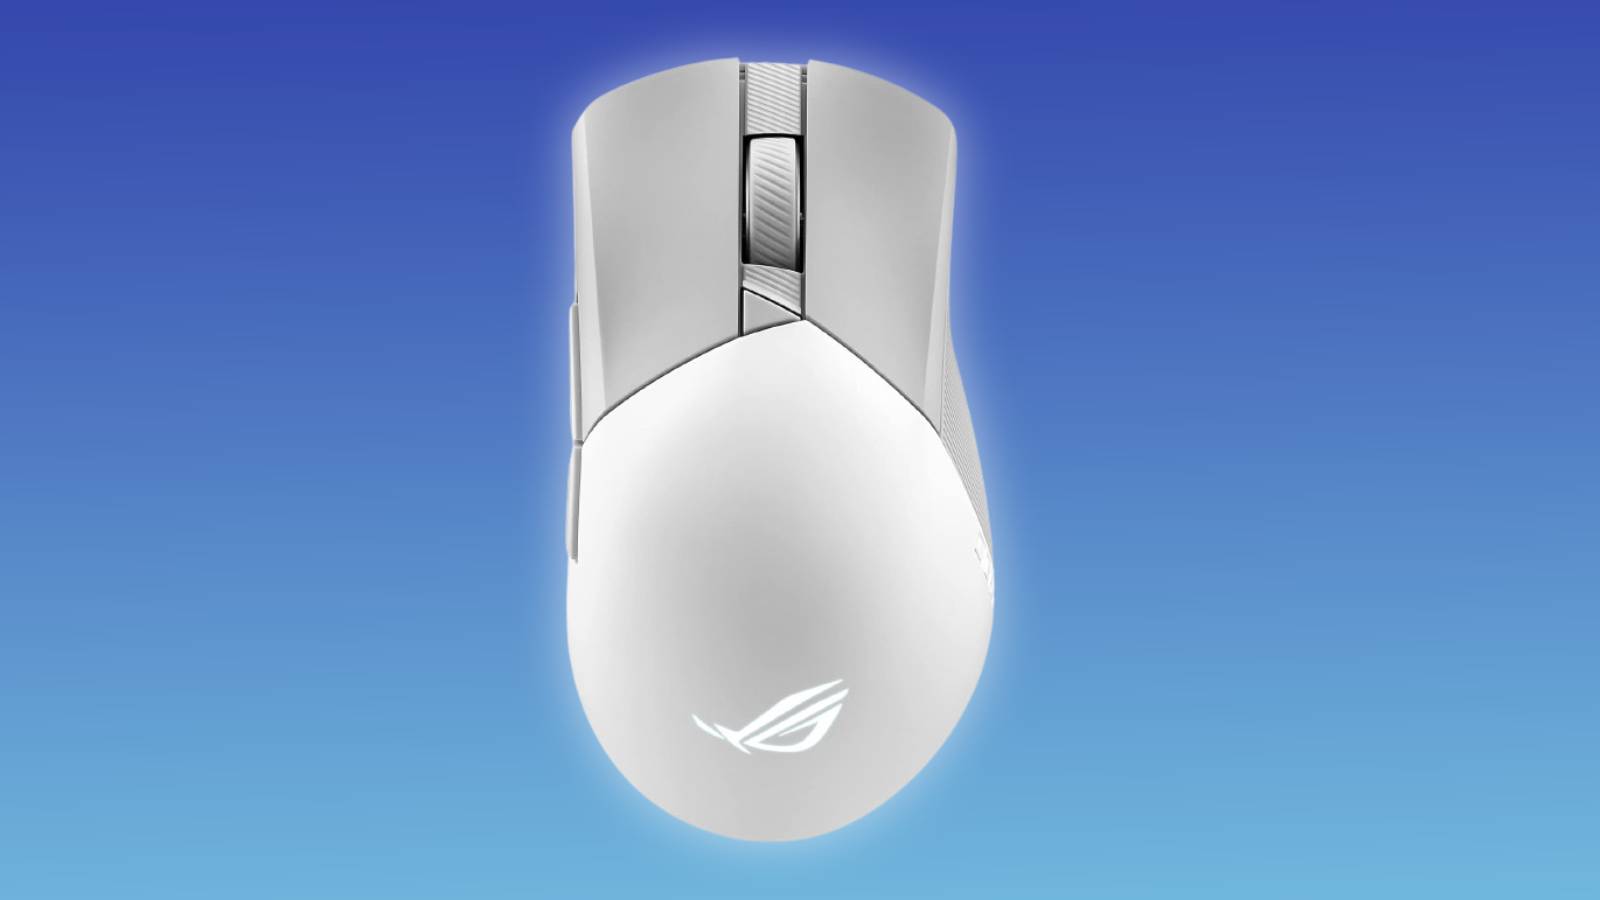 Image of the ASUS ROG Gladius III Wireless Gaming Mouse on a blue background.